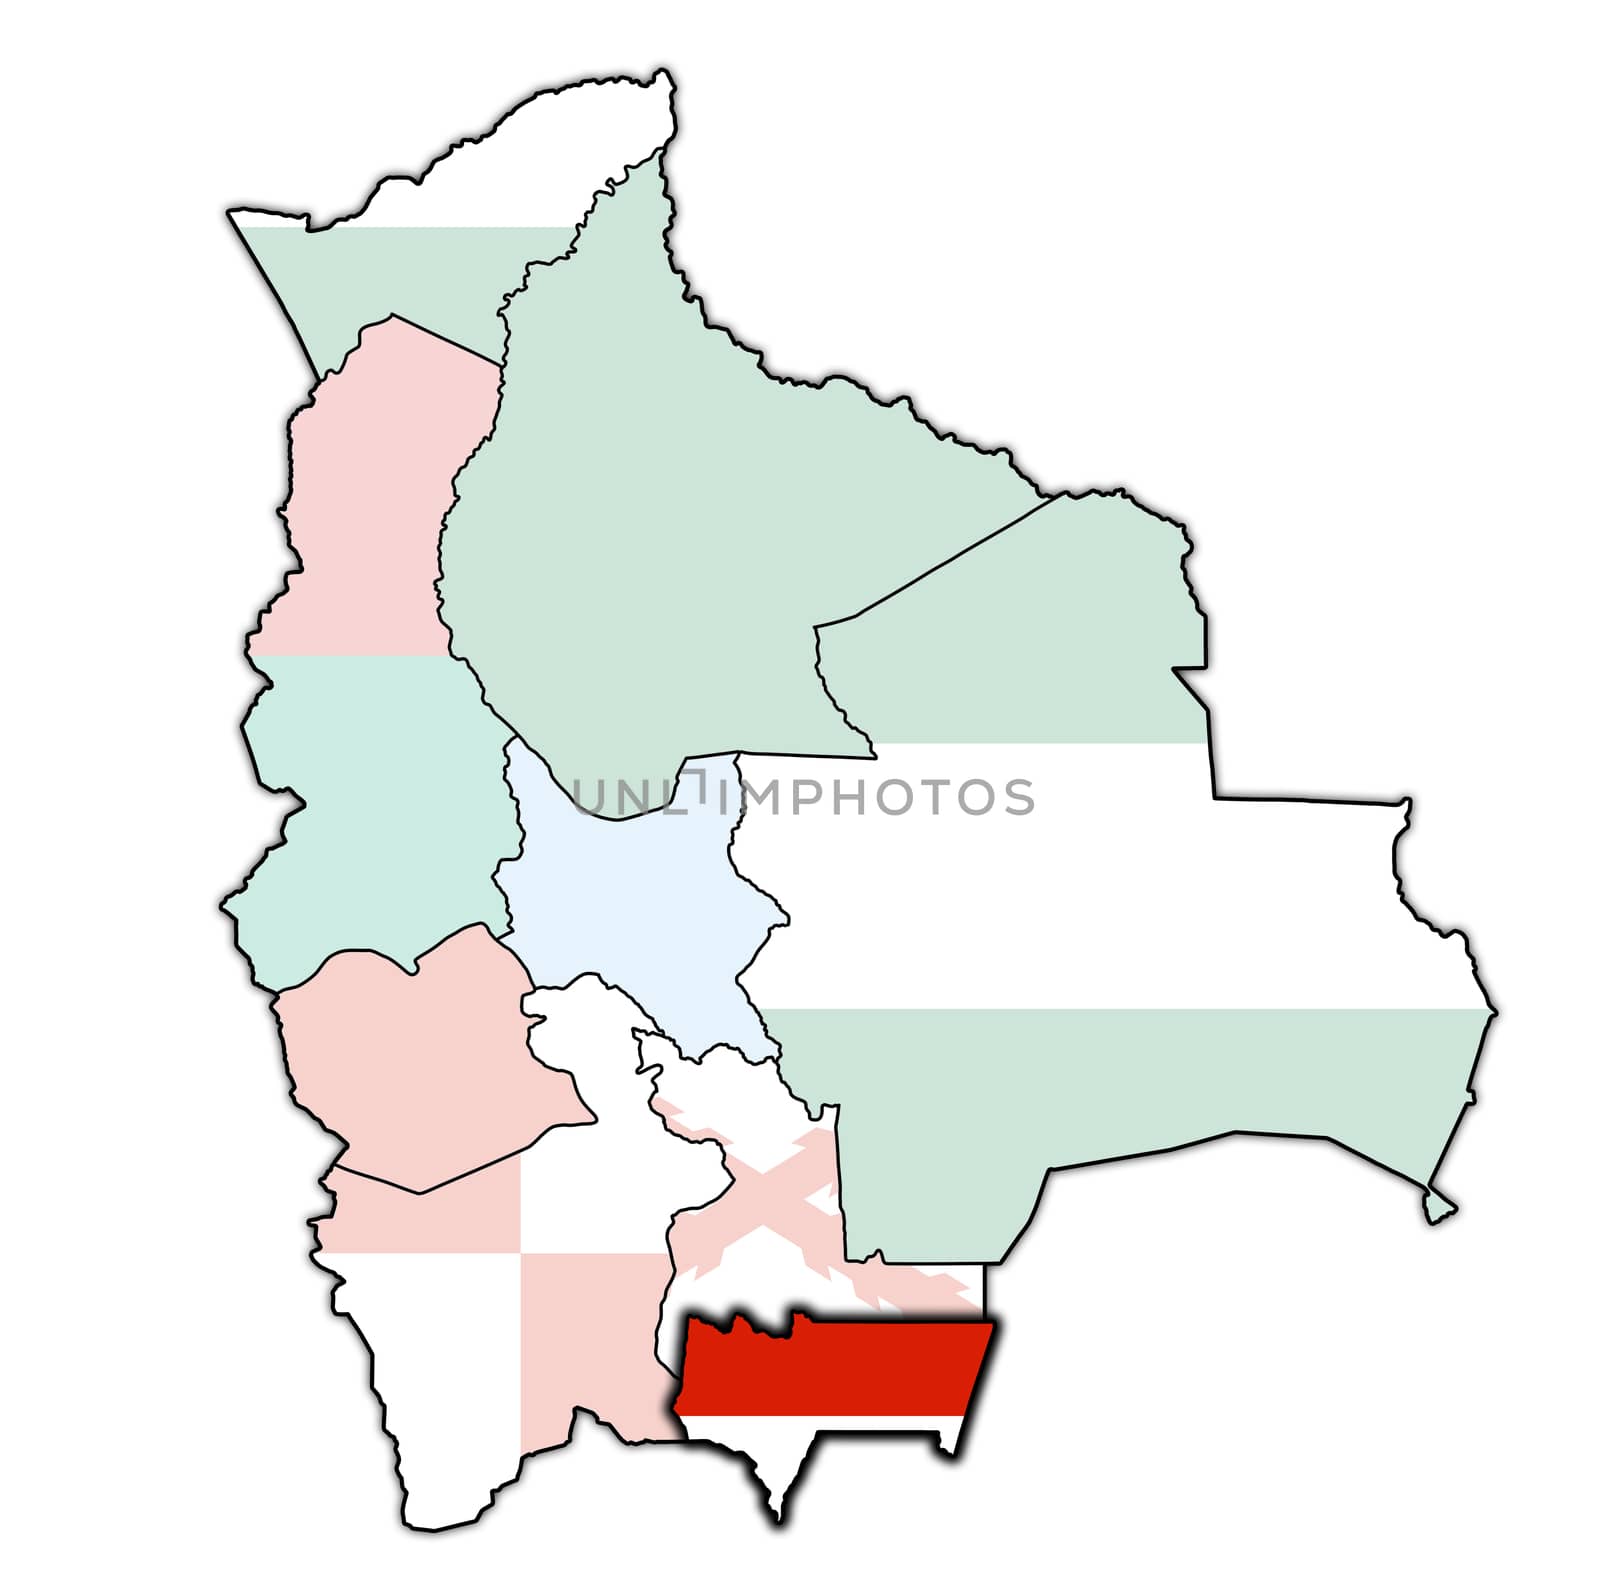 territory and flag of Tarija region on map with administrative divisions and borders of Czech Republic with clipping path